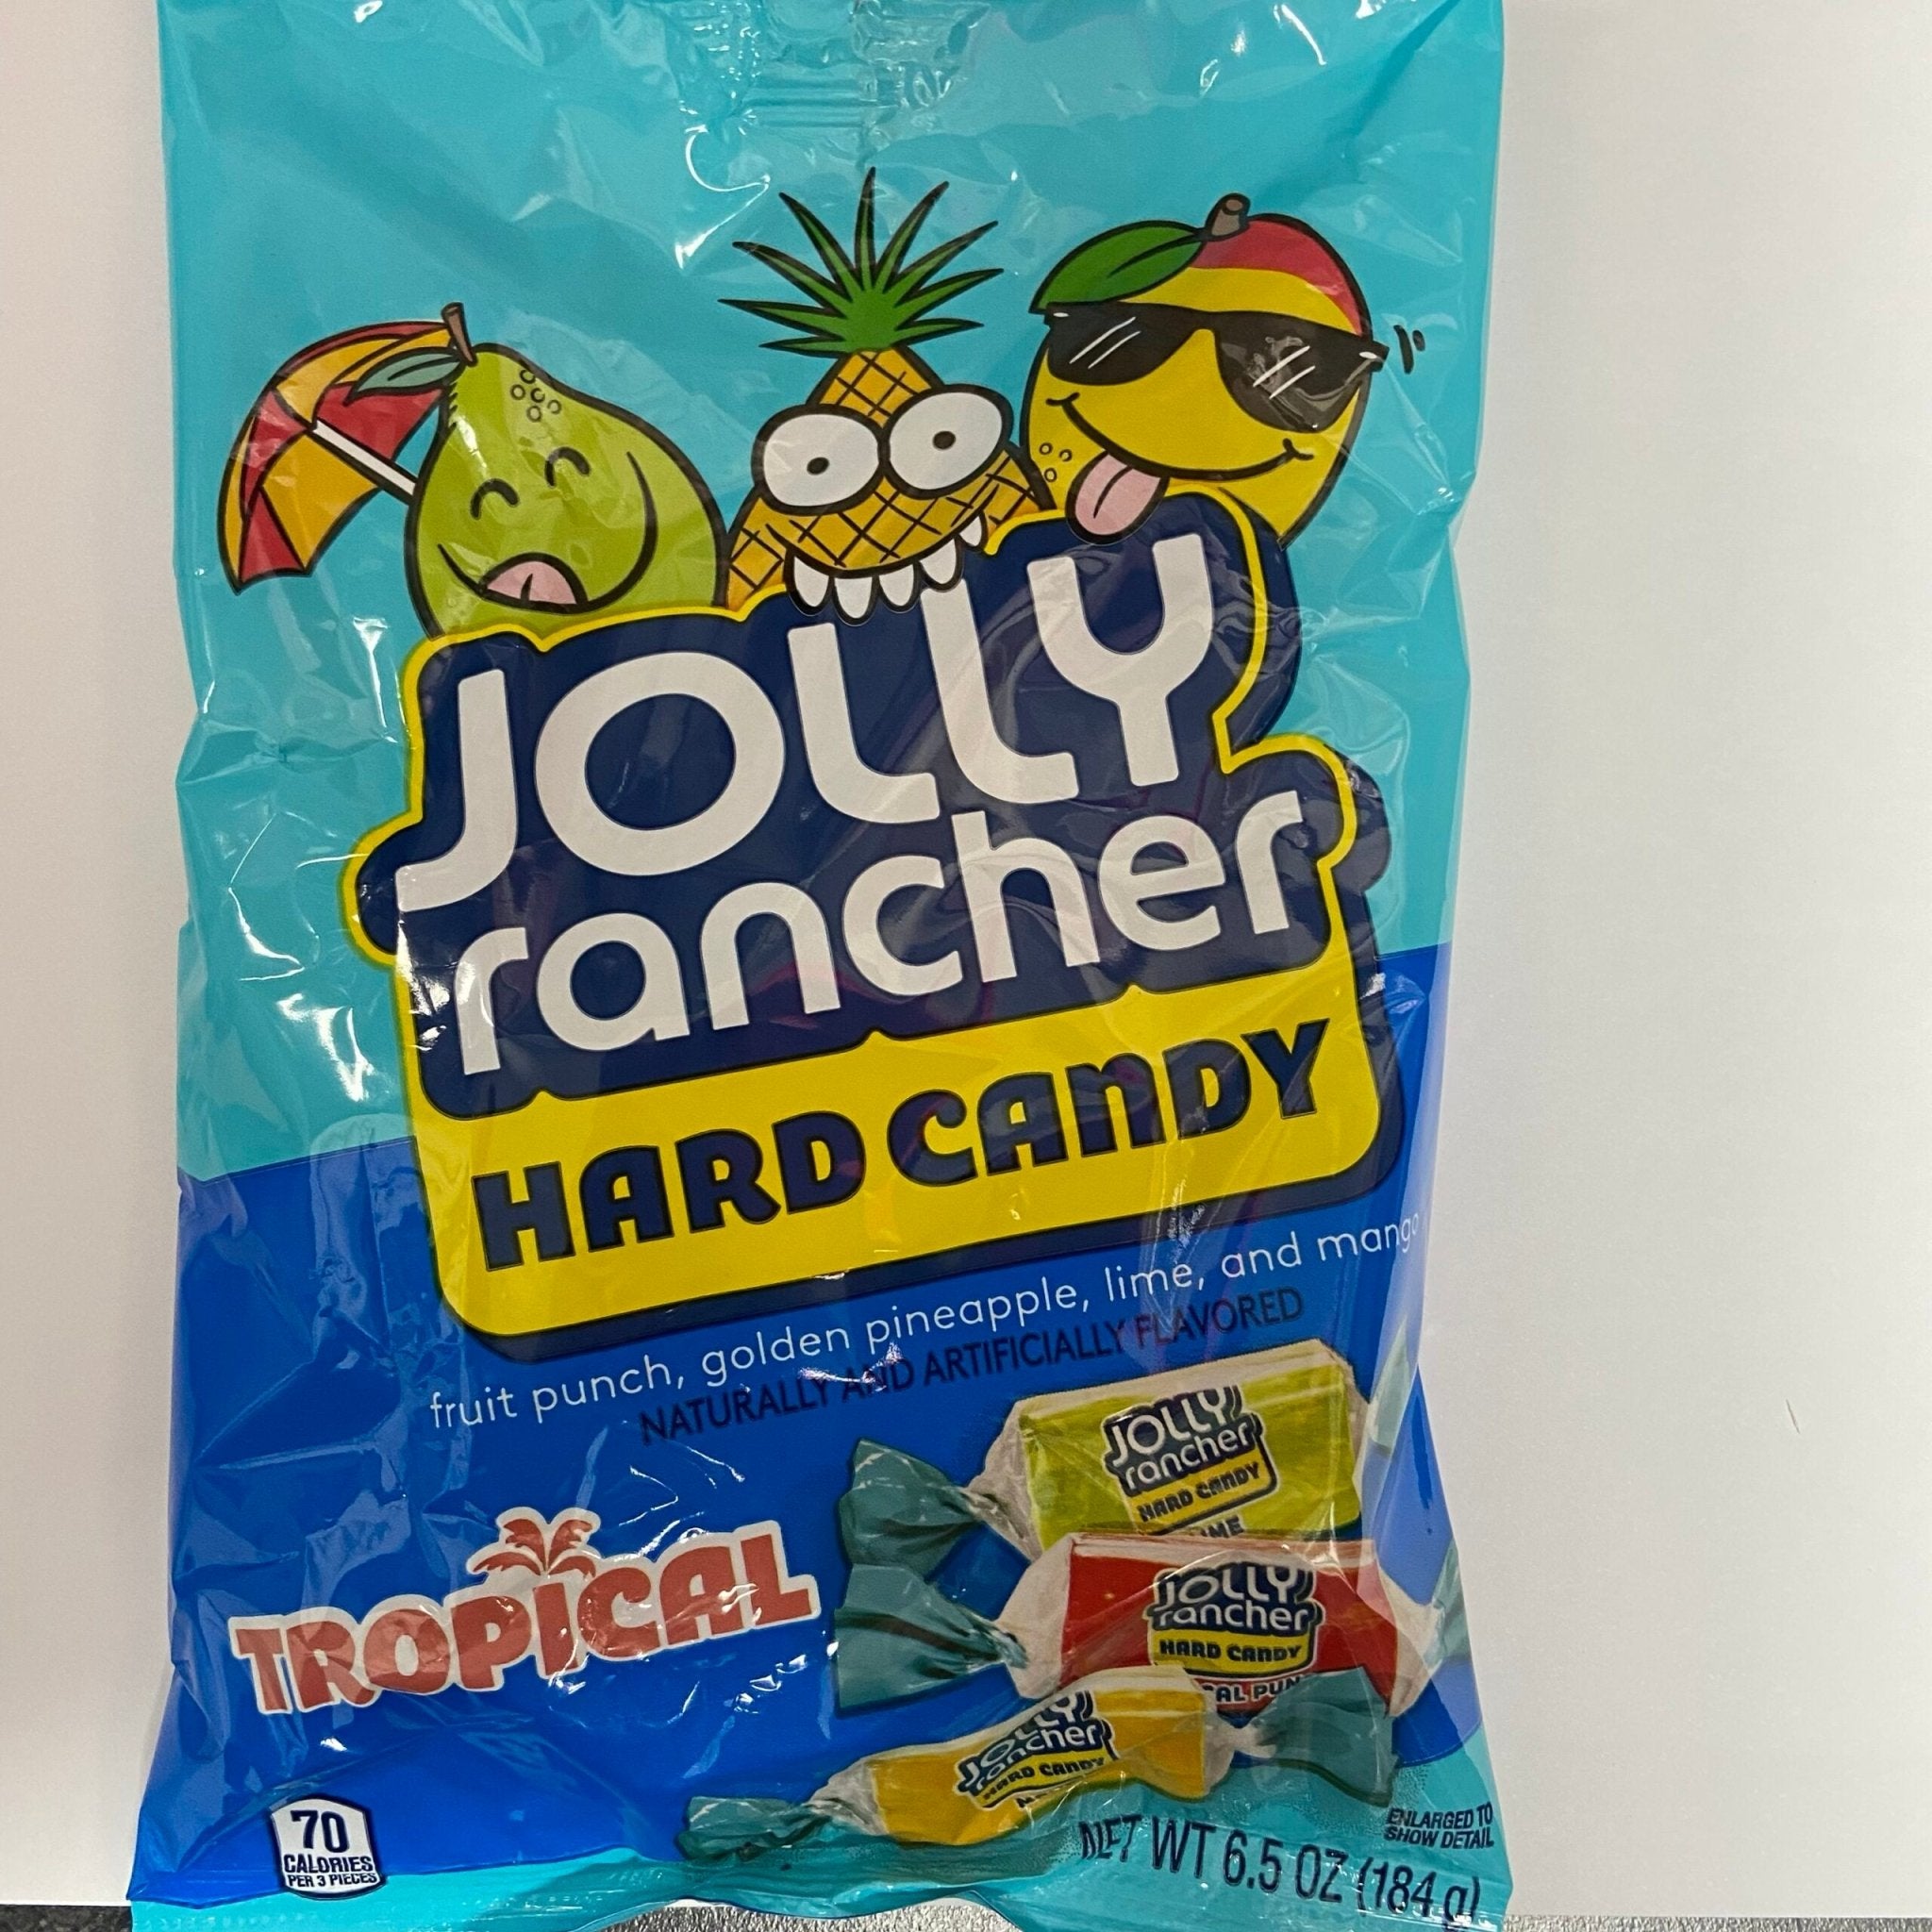 Jolly rancher tropical hard candy - Dream Candy